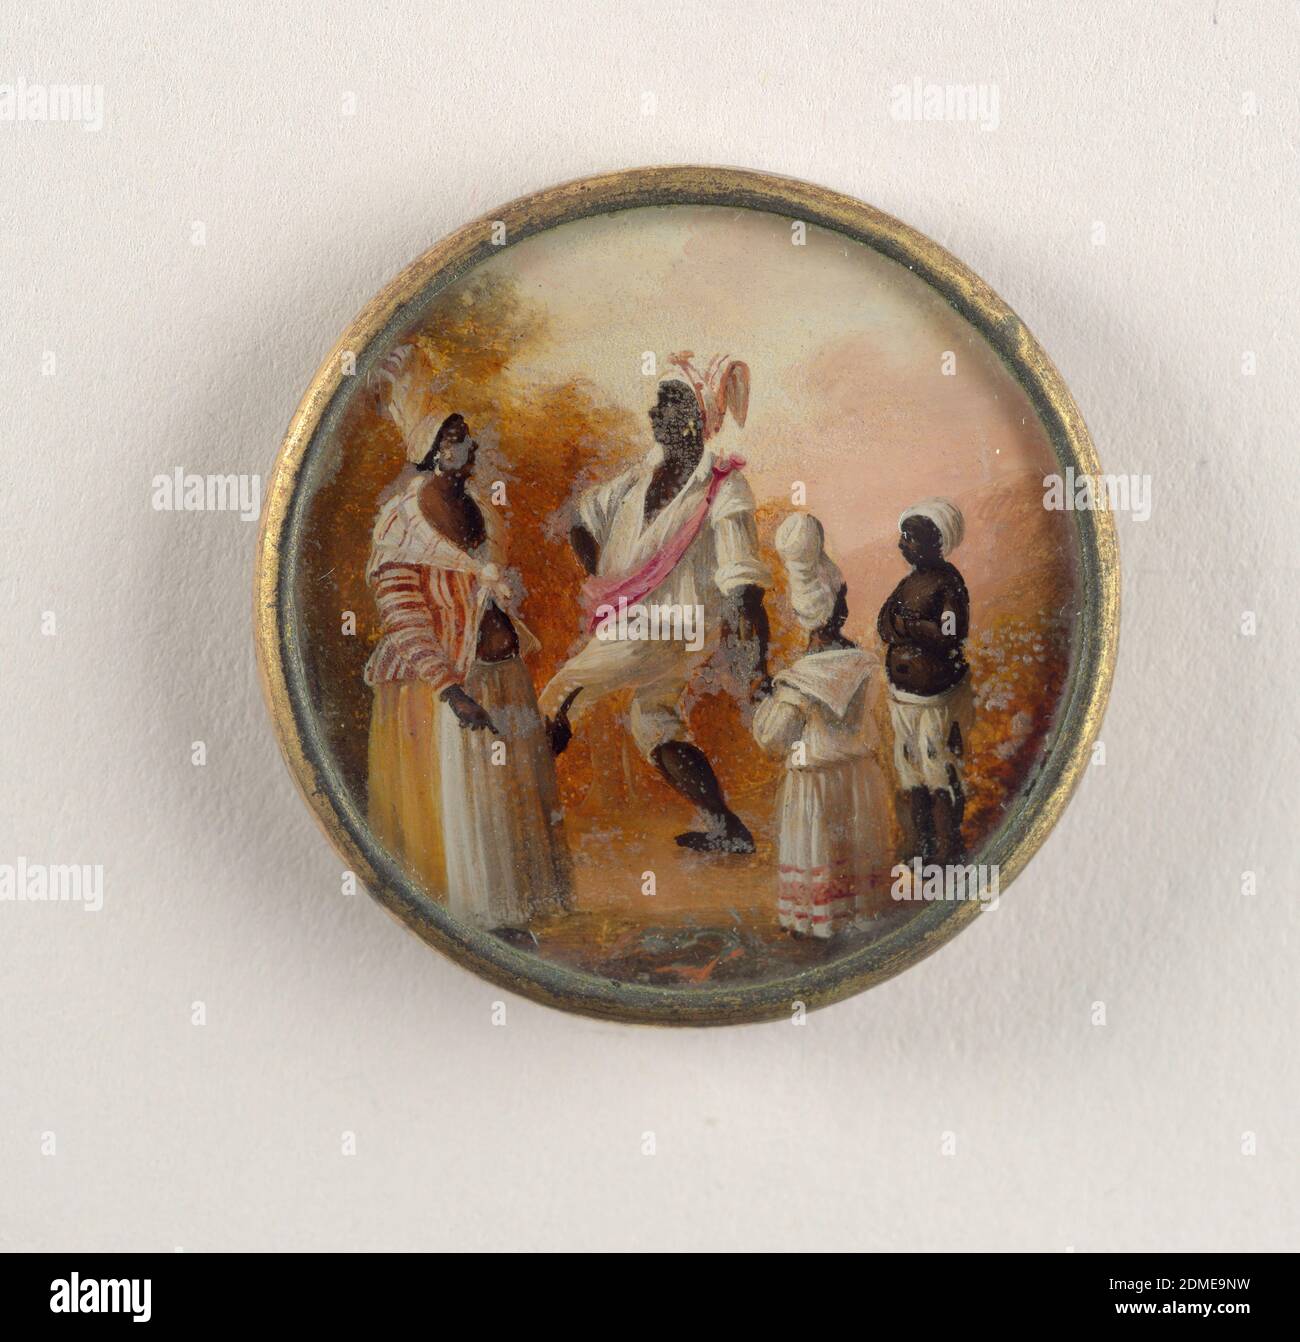 Button, Gouache paint on tin verre fixé, ivory (backing), glass, gilt metal, Button depicting scene of four figures in a landscape. A woman on the left wears a striped shirt and scarf, an orange and white skirt and turban; she faces man who is dancing (marching?) and wears a white shirt with pink sash and red and white scarf on head. Two smaller figures stand to the side watching., late 18th century, costume & accessories, Decorative Arts, Button Stock Photo